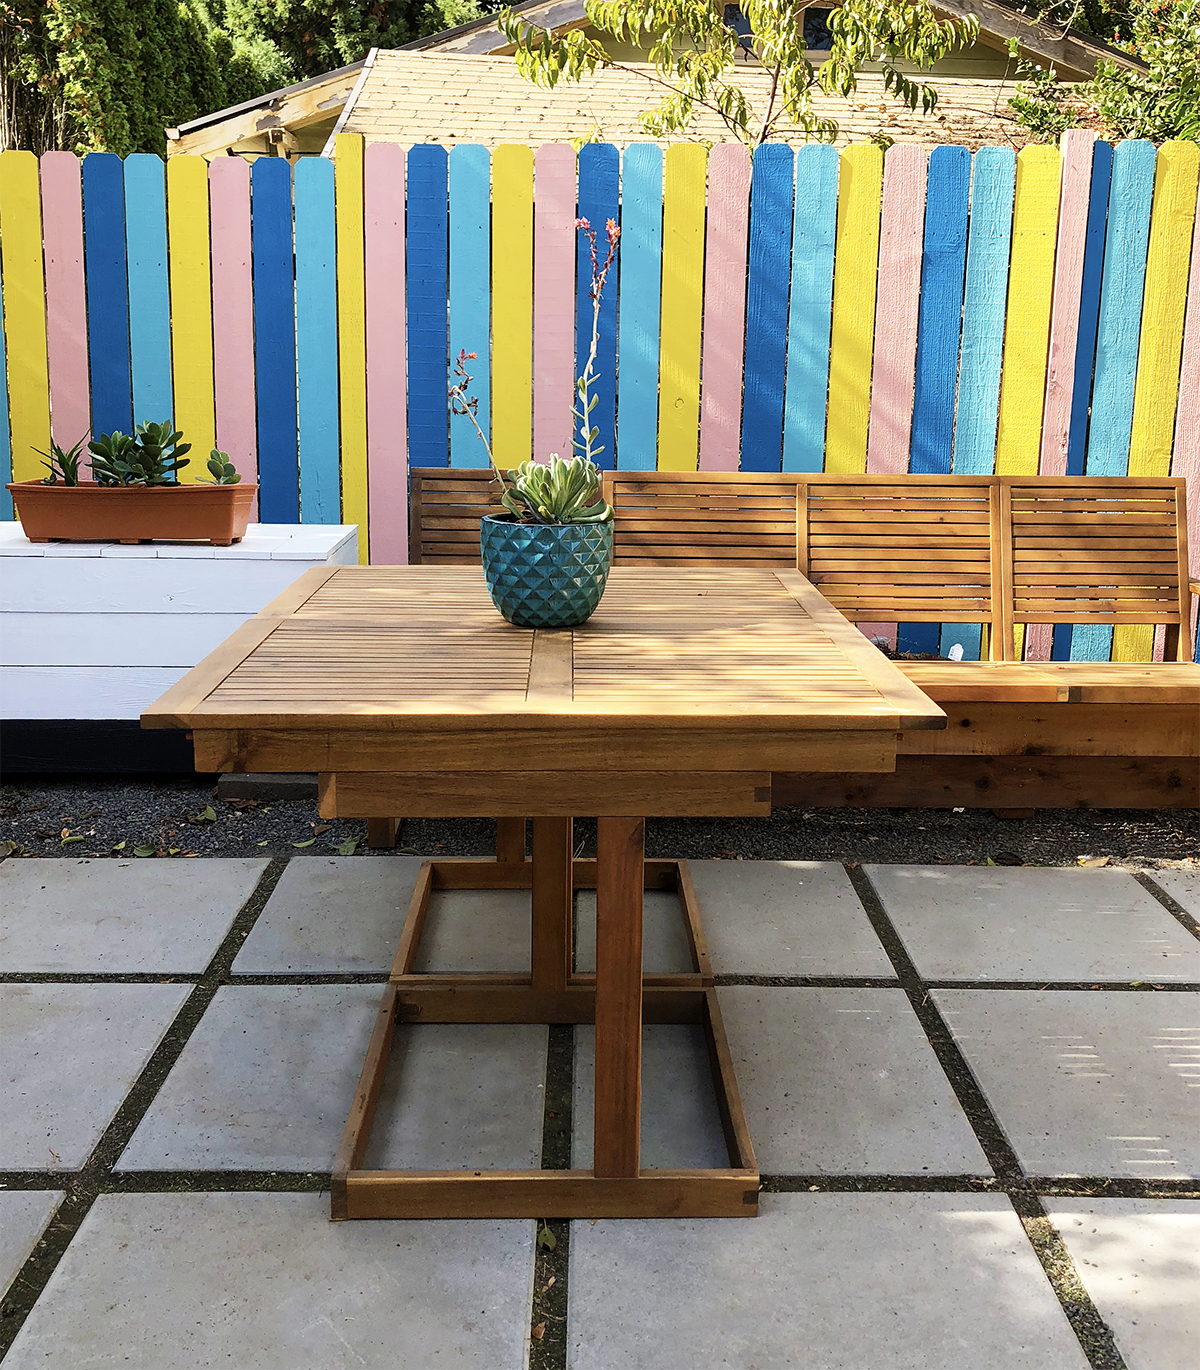 My DIY Outdoor Sofa Hack – For Those Scared of Building Furniture from Scratch